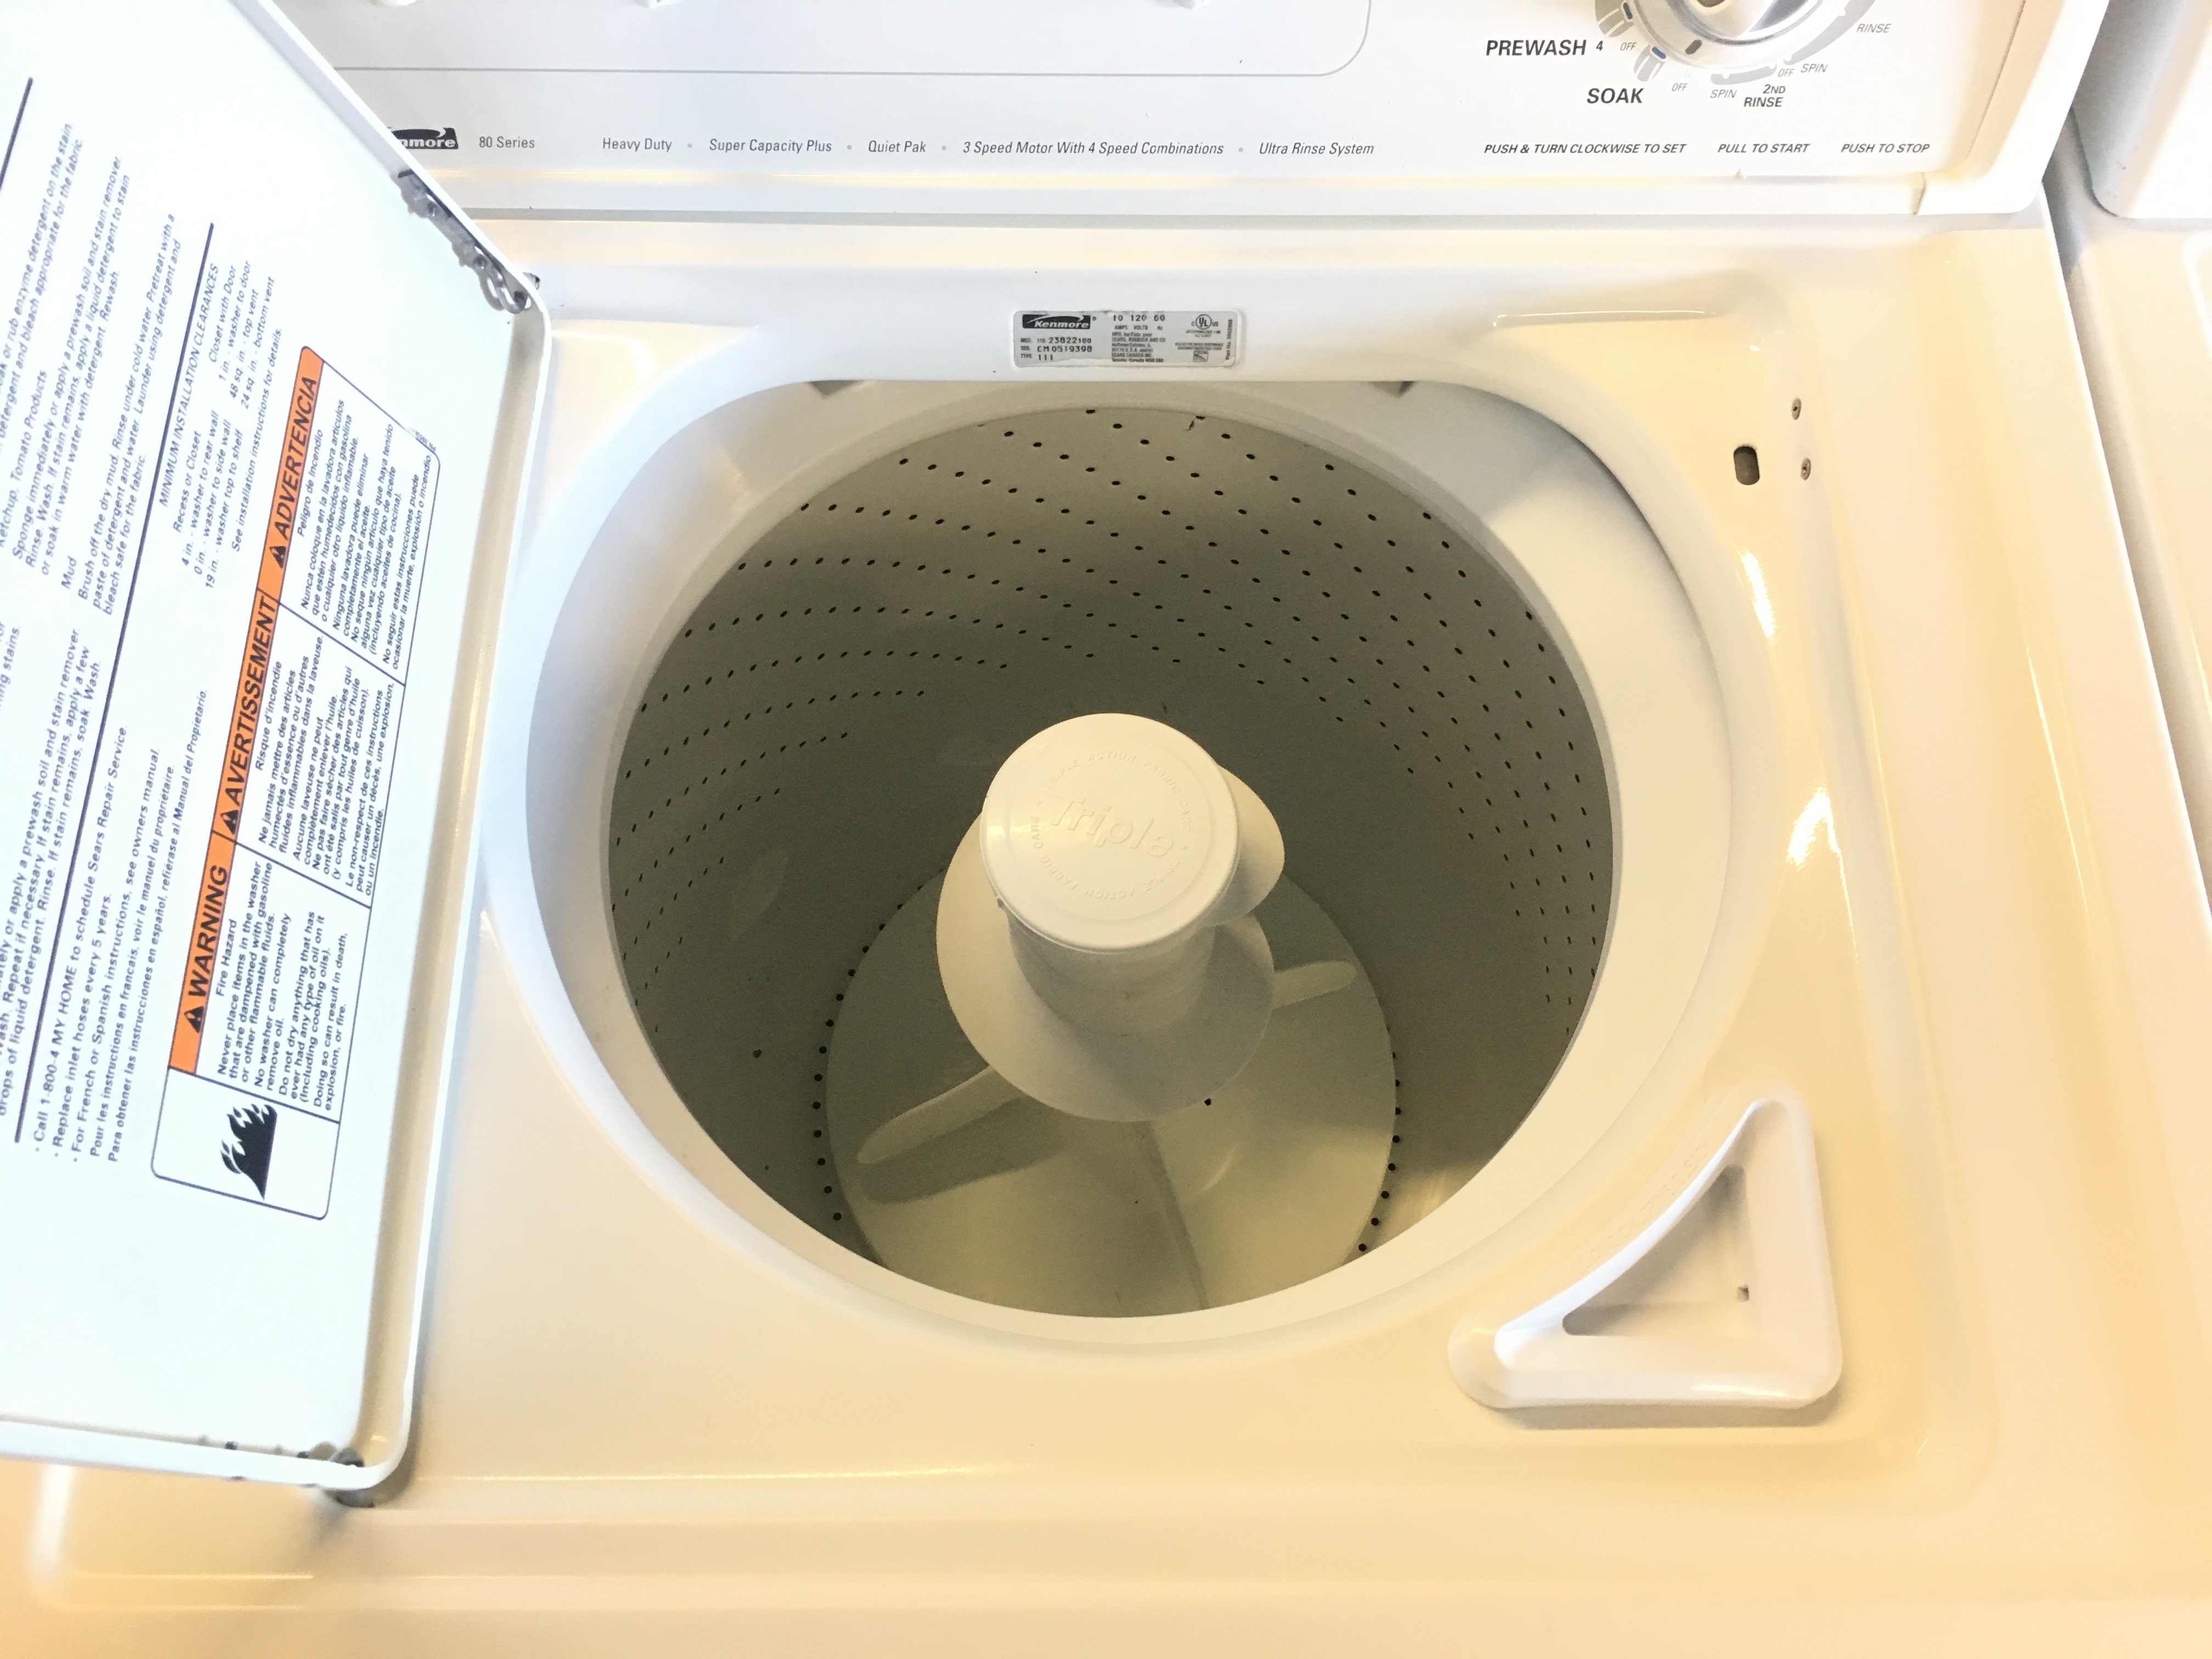 Undisputed G.O.A.T, Kenmore Direct Drive 80 Series Top-Load Washer & Dryer Set Quality Refurbished with 1-Year Warranty INCLUDED!